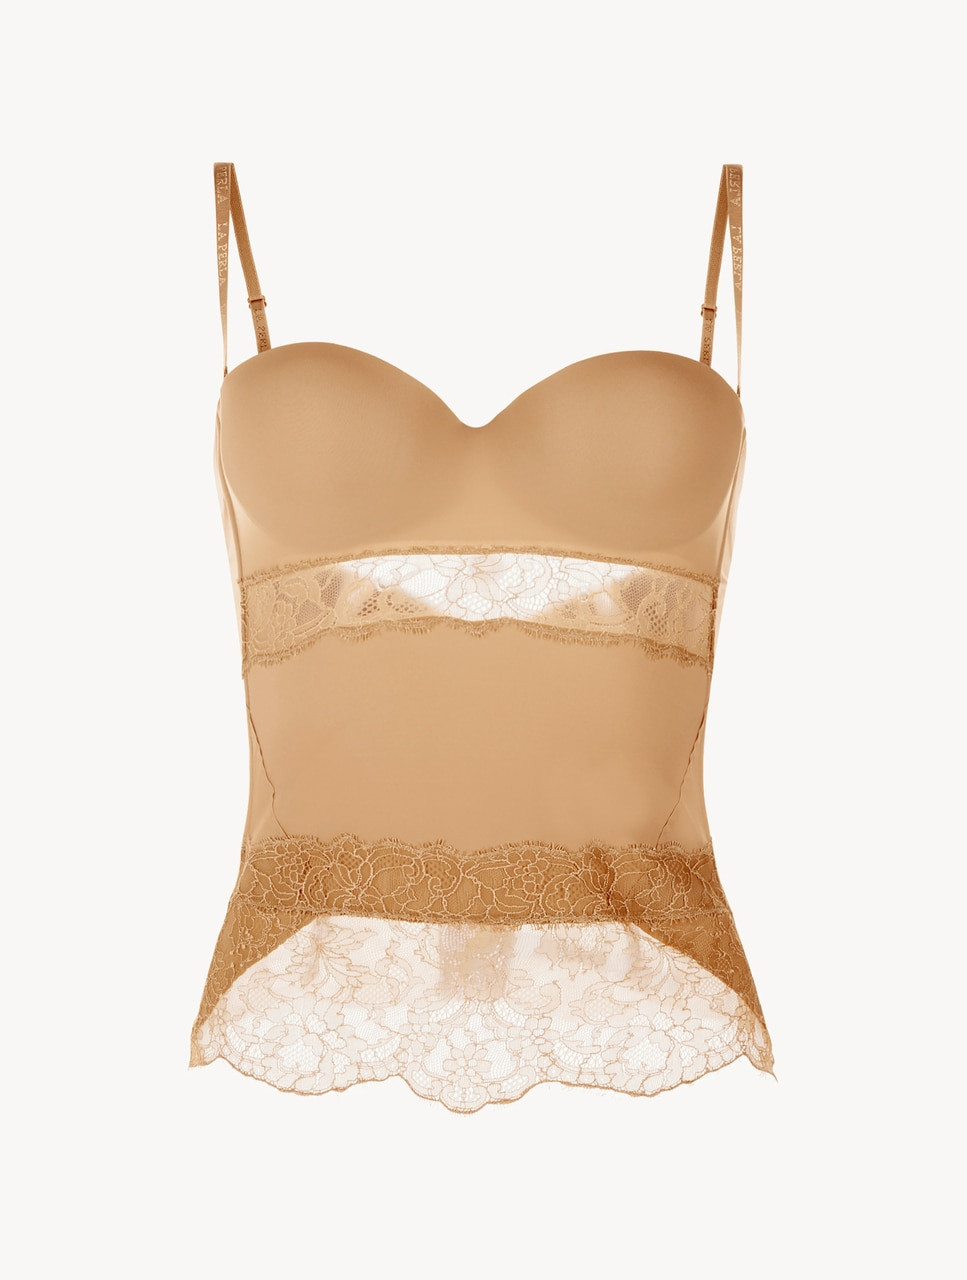 Nude Lycra control bustier with Chantilly lace